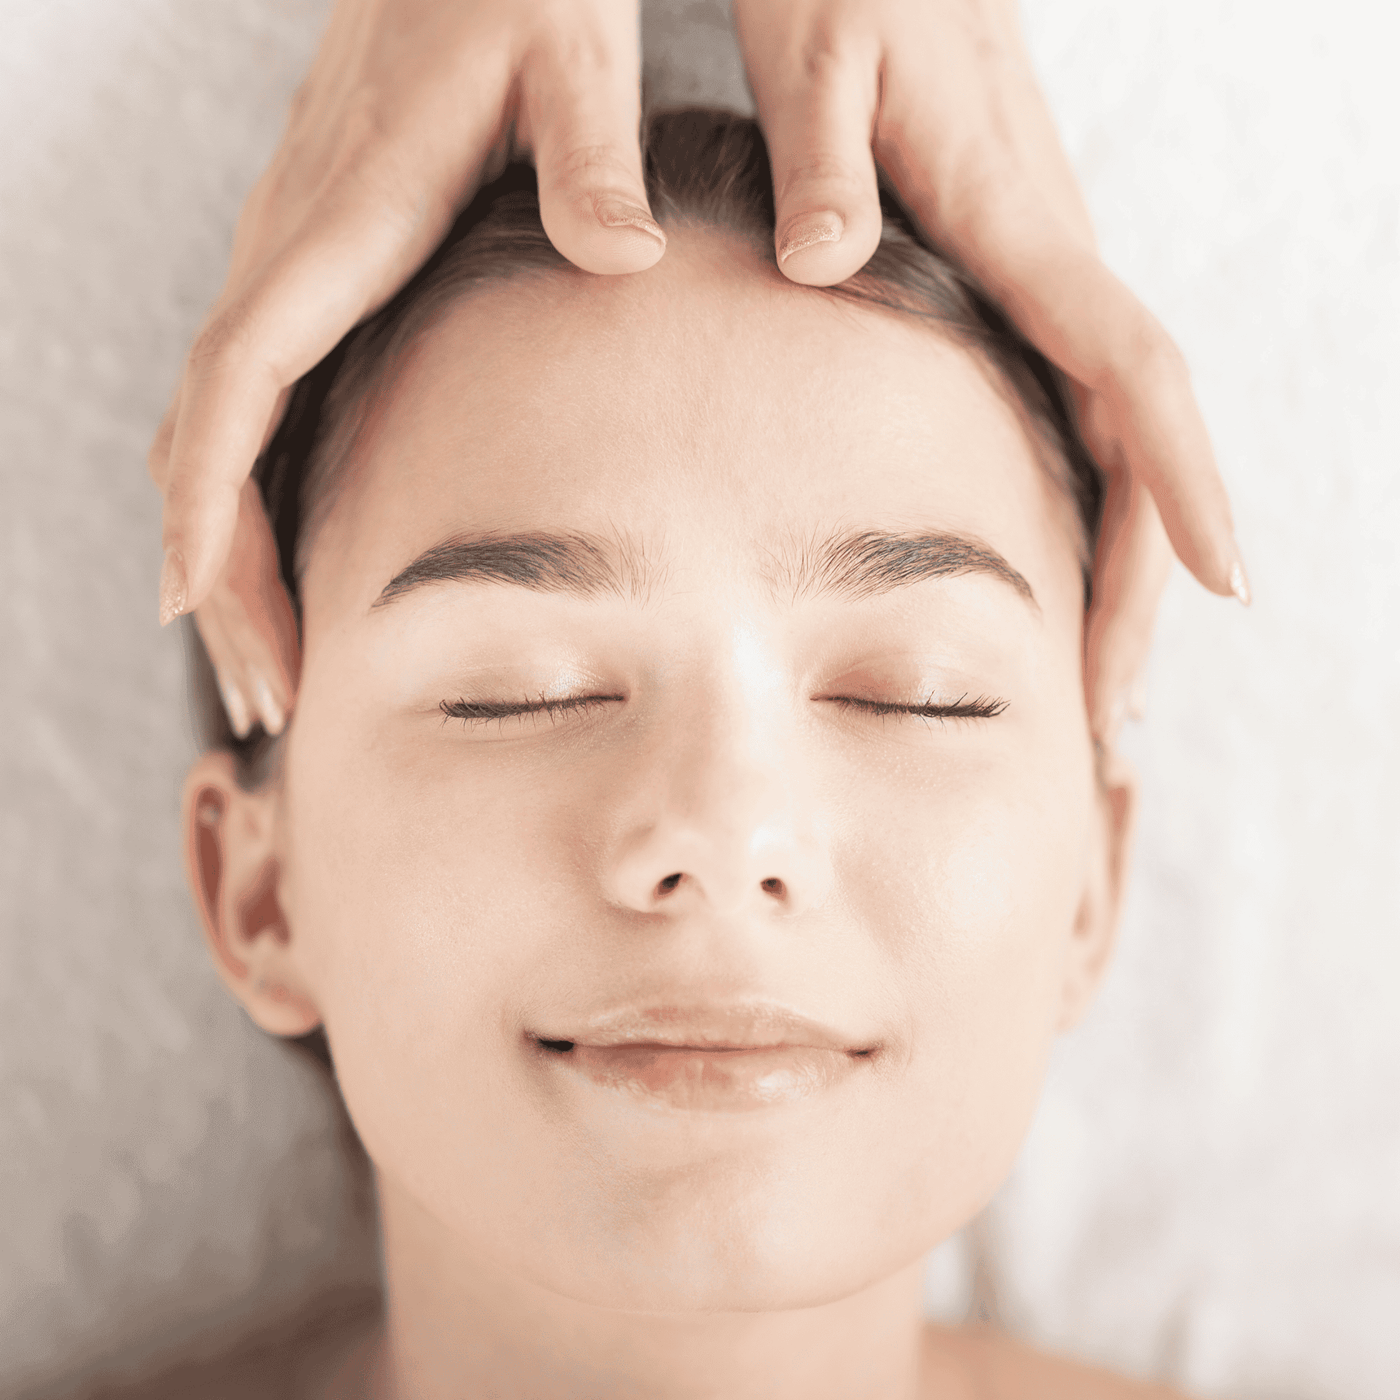 Indian Head Massage Online Course - The London Brow Company